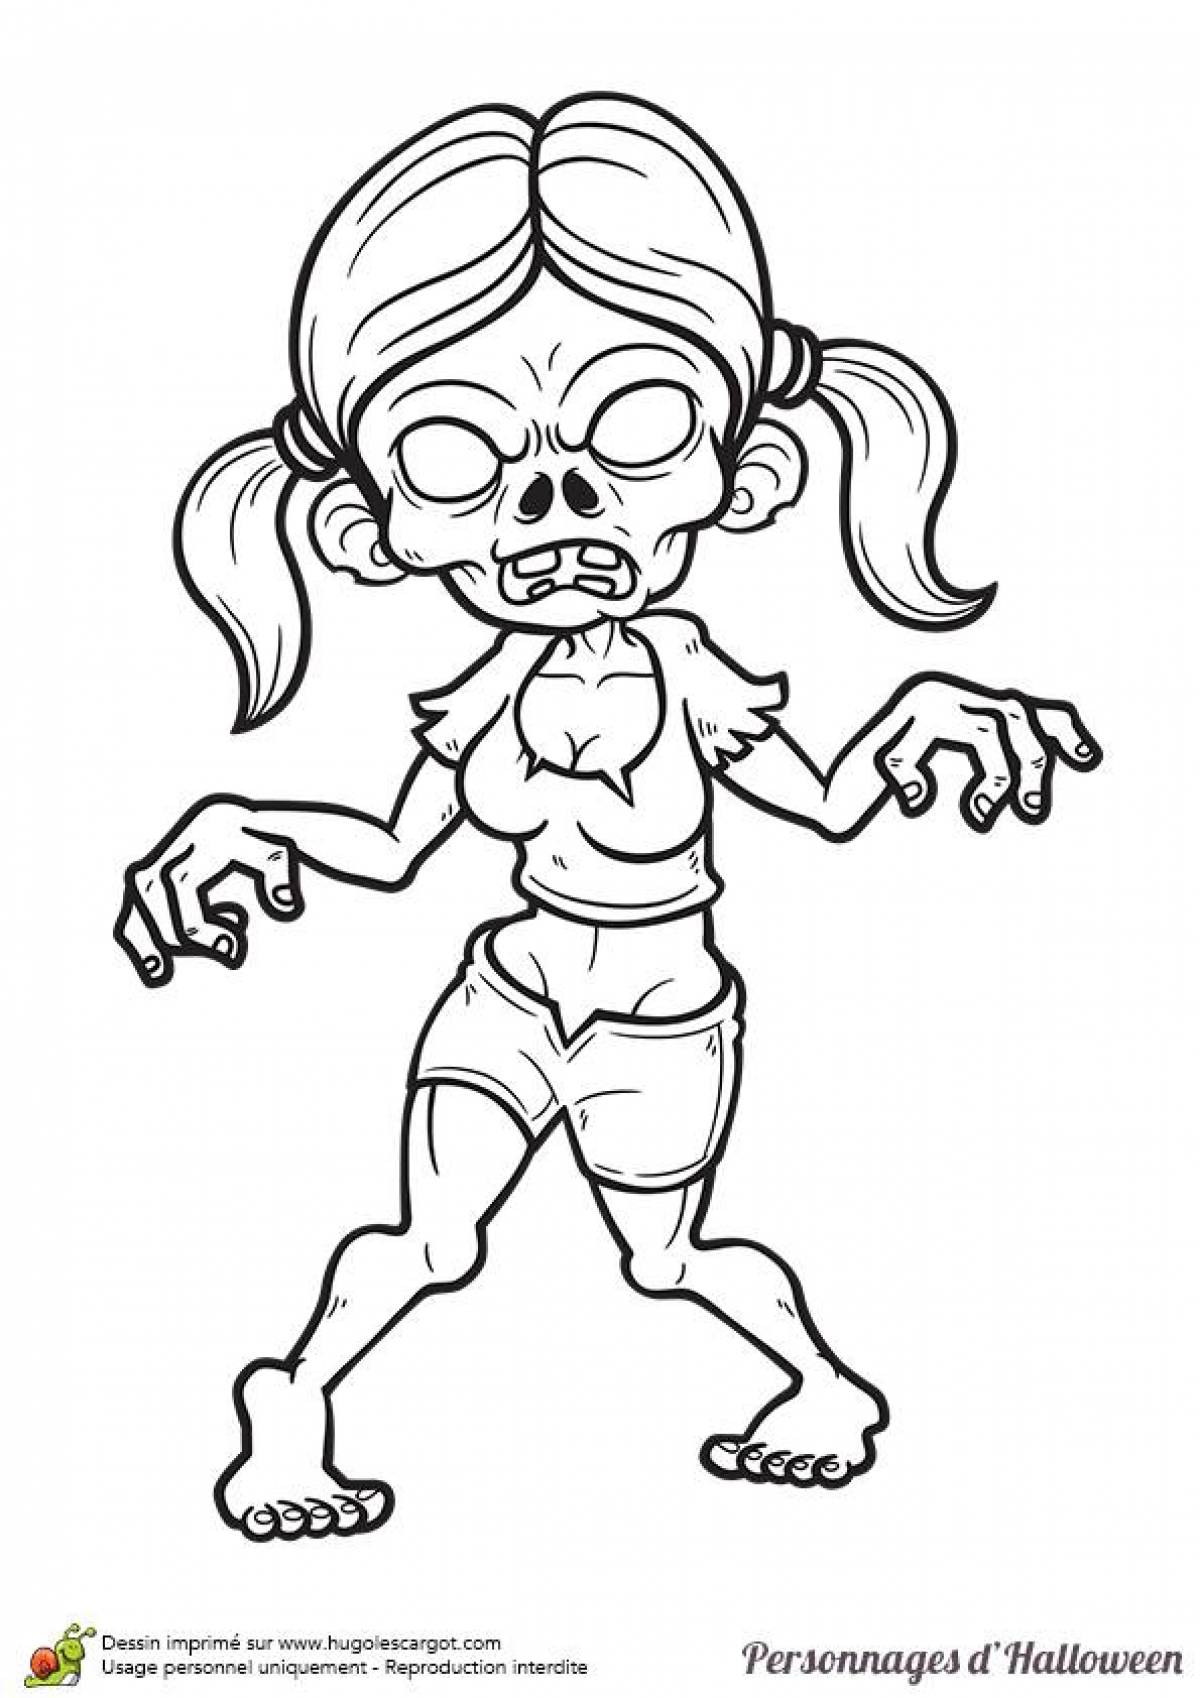 Disturbing coloring pages scary stories